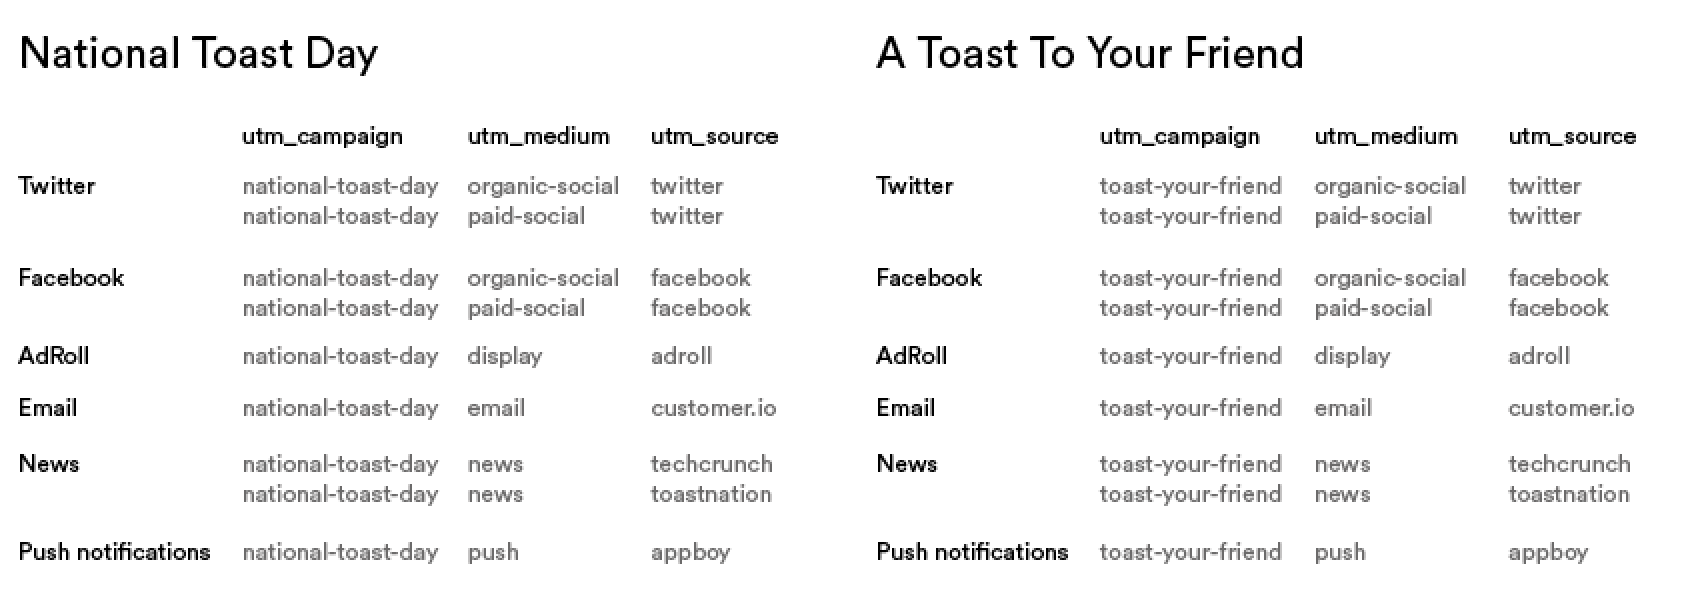 Screenshot of two tables, one for the National Toast Day campaign and one for the A Toast to Your Friend campaign. Each table has columns for utm_campaign, utm_medium, and utm_source.